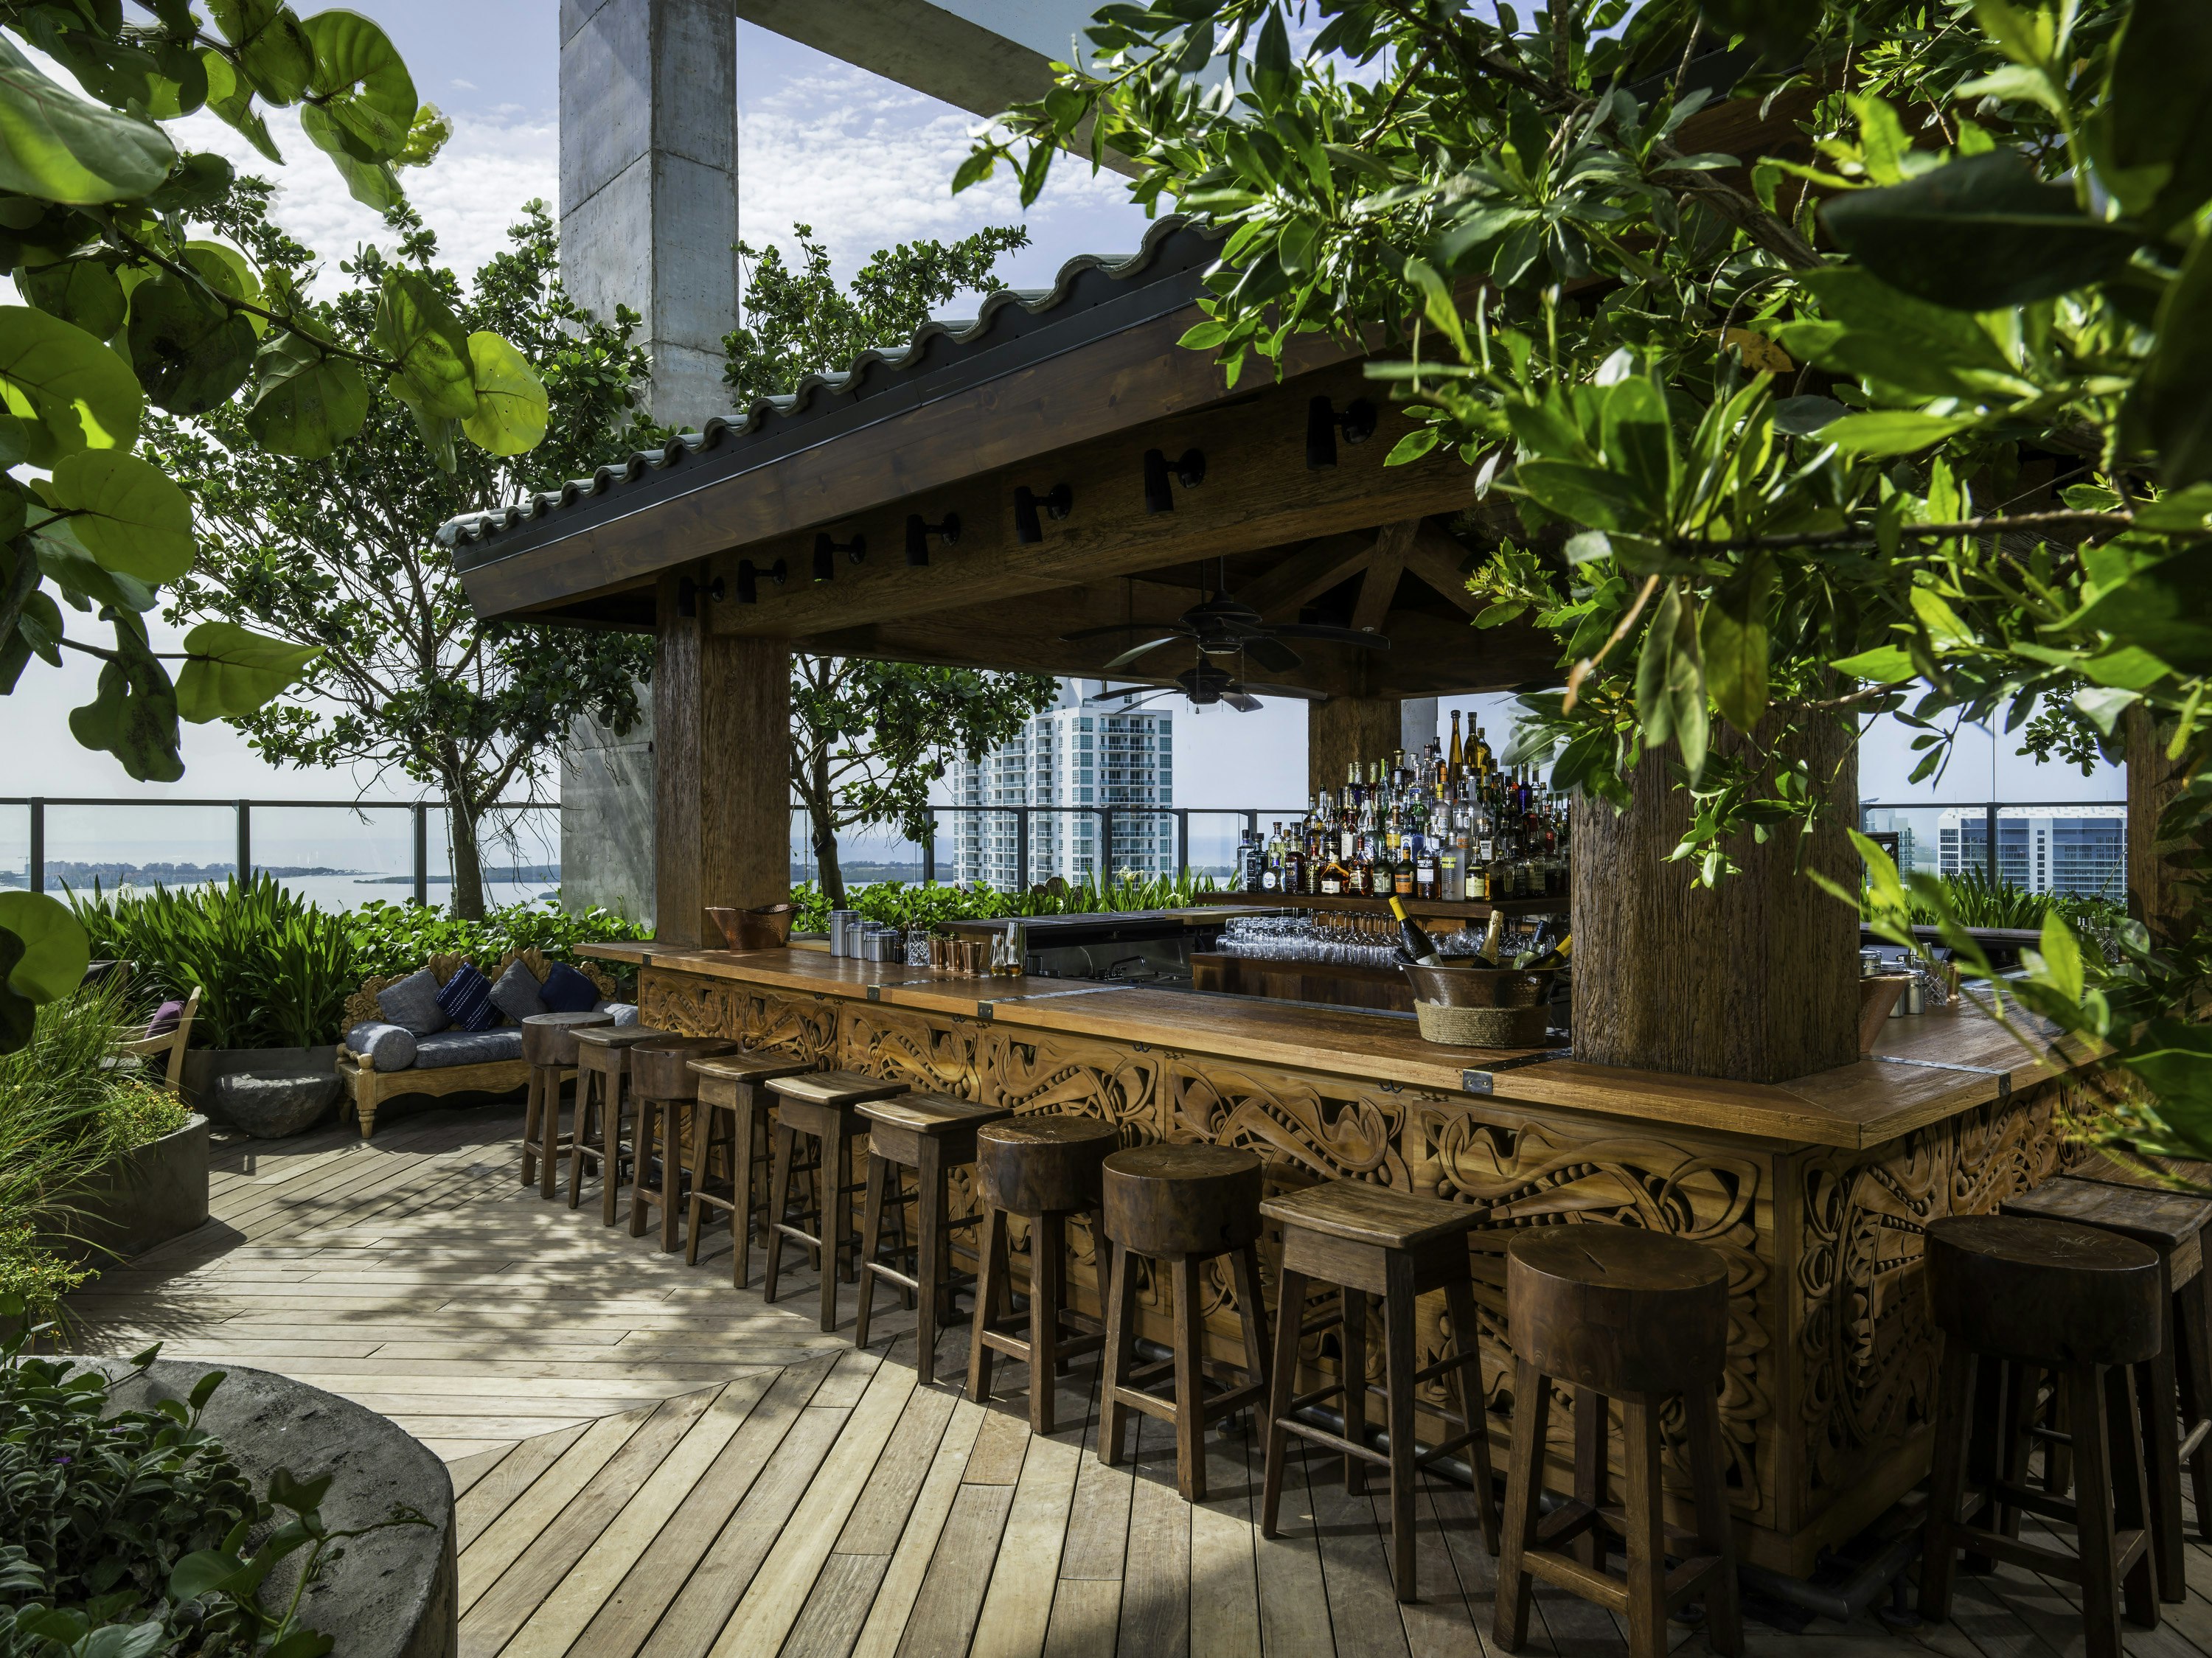 A rooftop bar scene; in the centre there's a huge covered bar, with intricate wood-carvings and wooden bar stools lining it, and the area is decorated with lush greenery. Part of the Miami skyline is visible beyond glass railings.